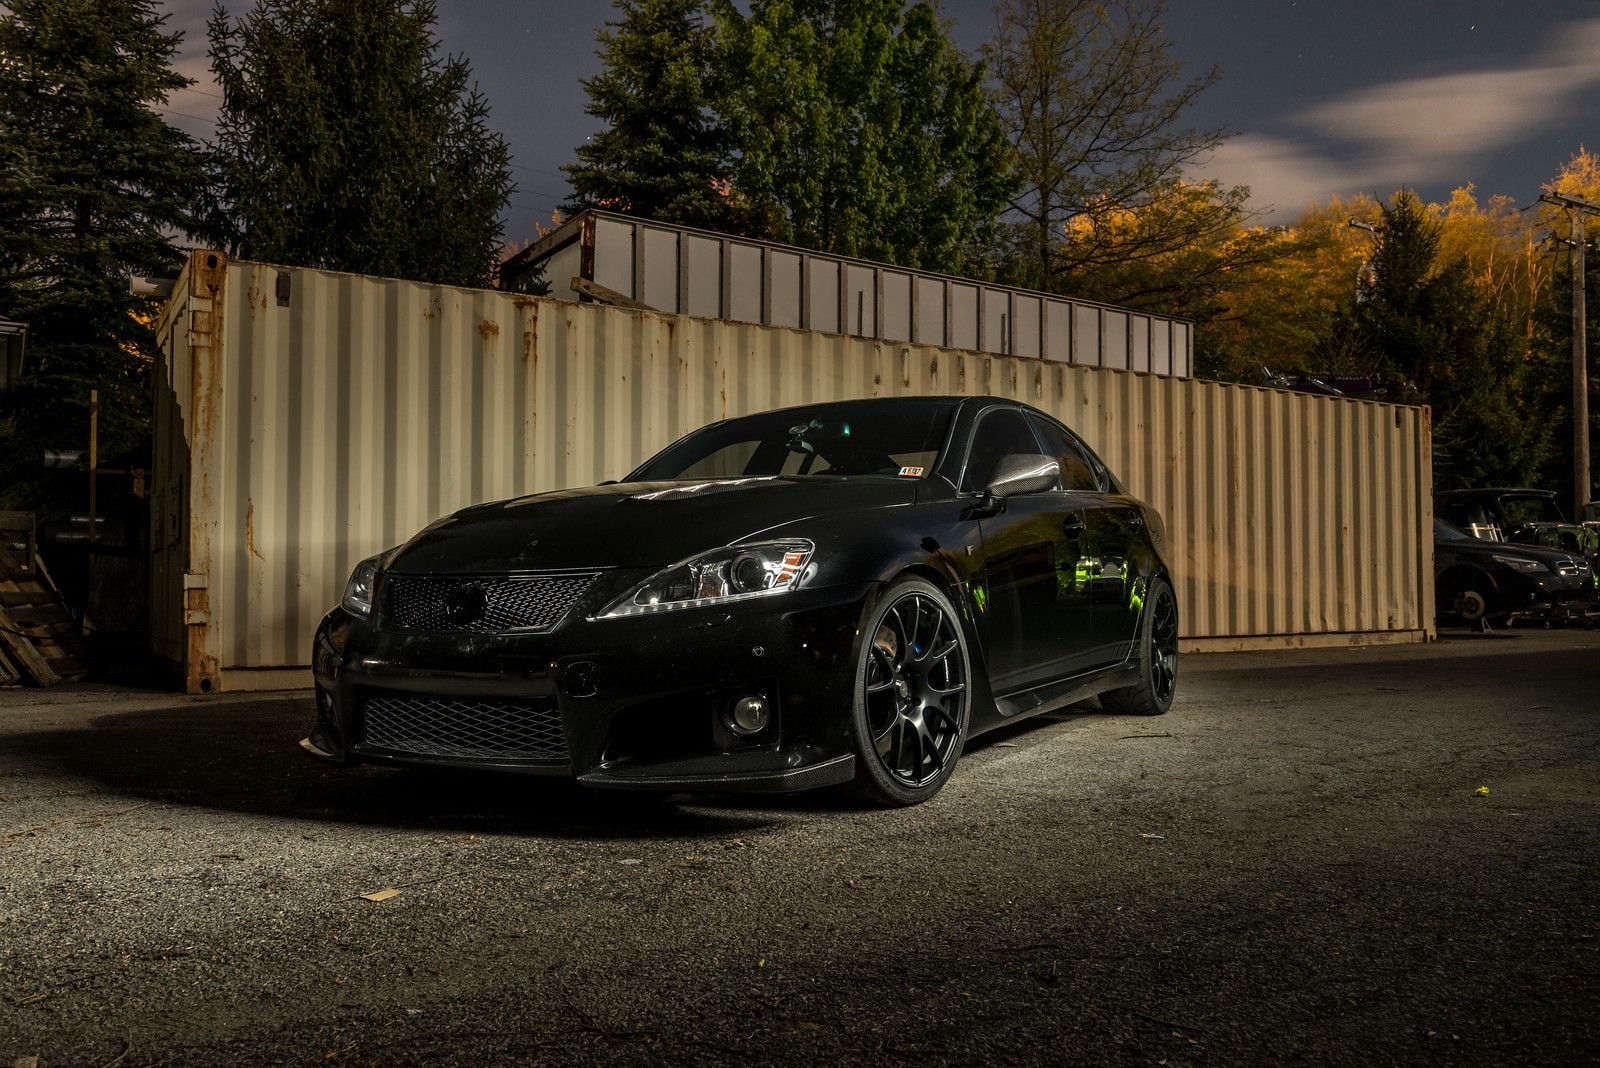 2008 Lexus IS F - IS F Special Build 2008 Obsidian - Used - VIN JTHBP262585000775 - 125,700 Miles - 8 cyl - 2WD - Automatic - Sedan - Black - Pittsburgh, PA 16066, United States